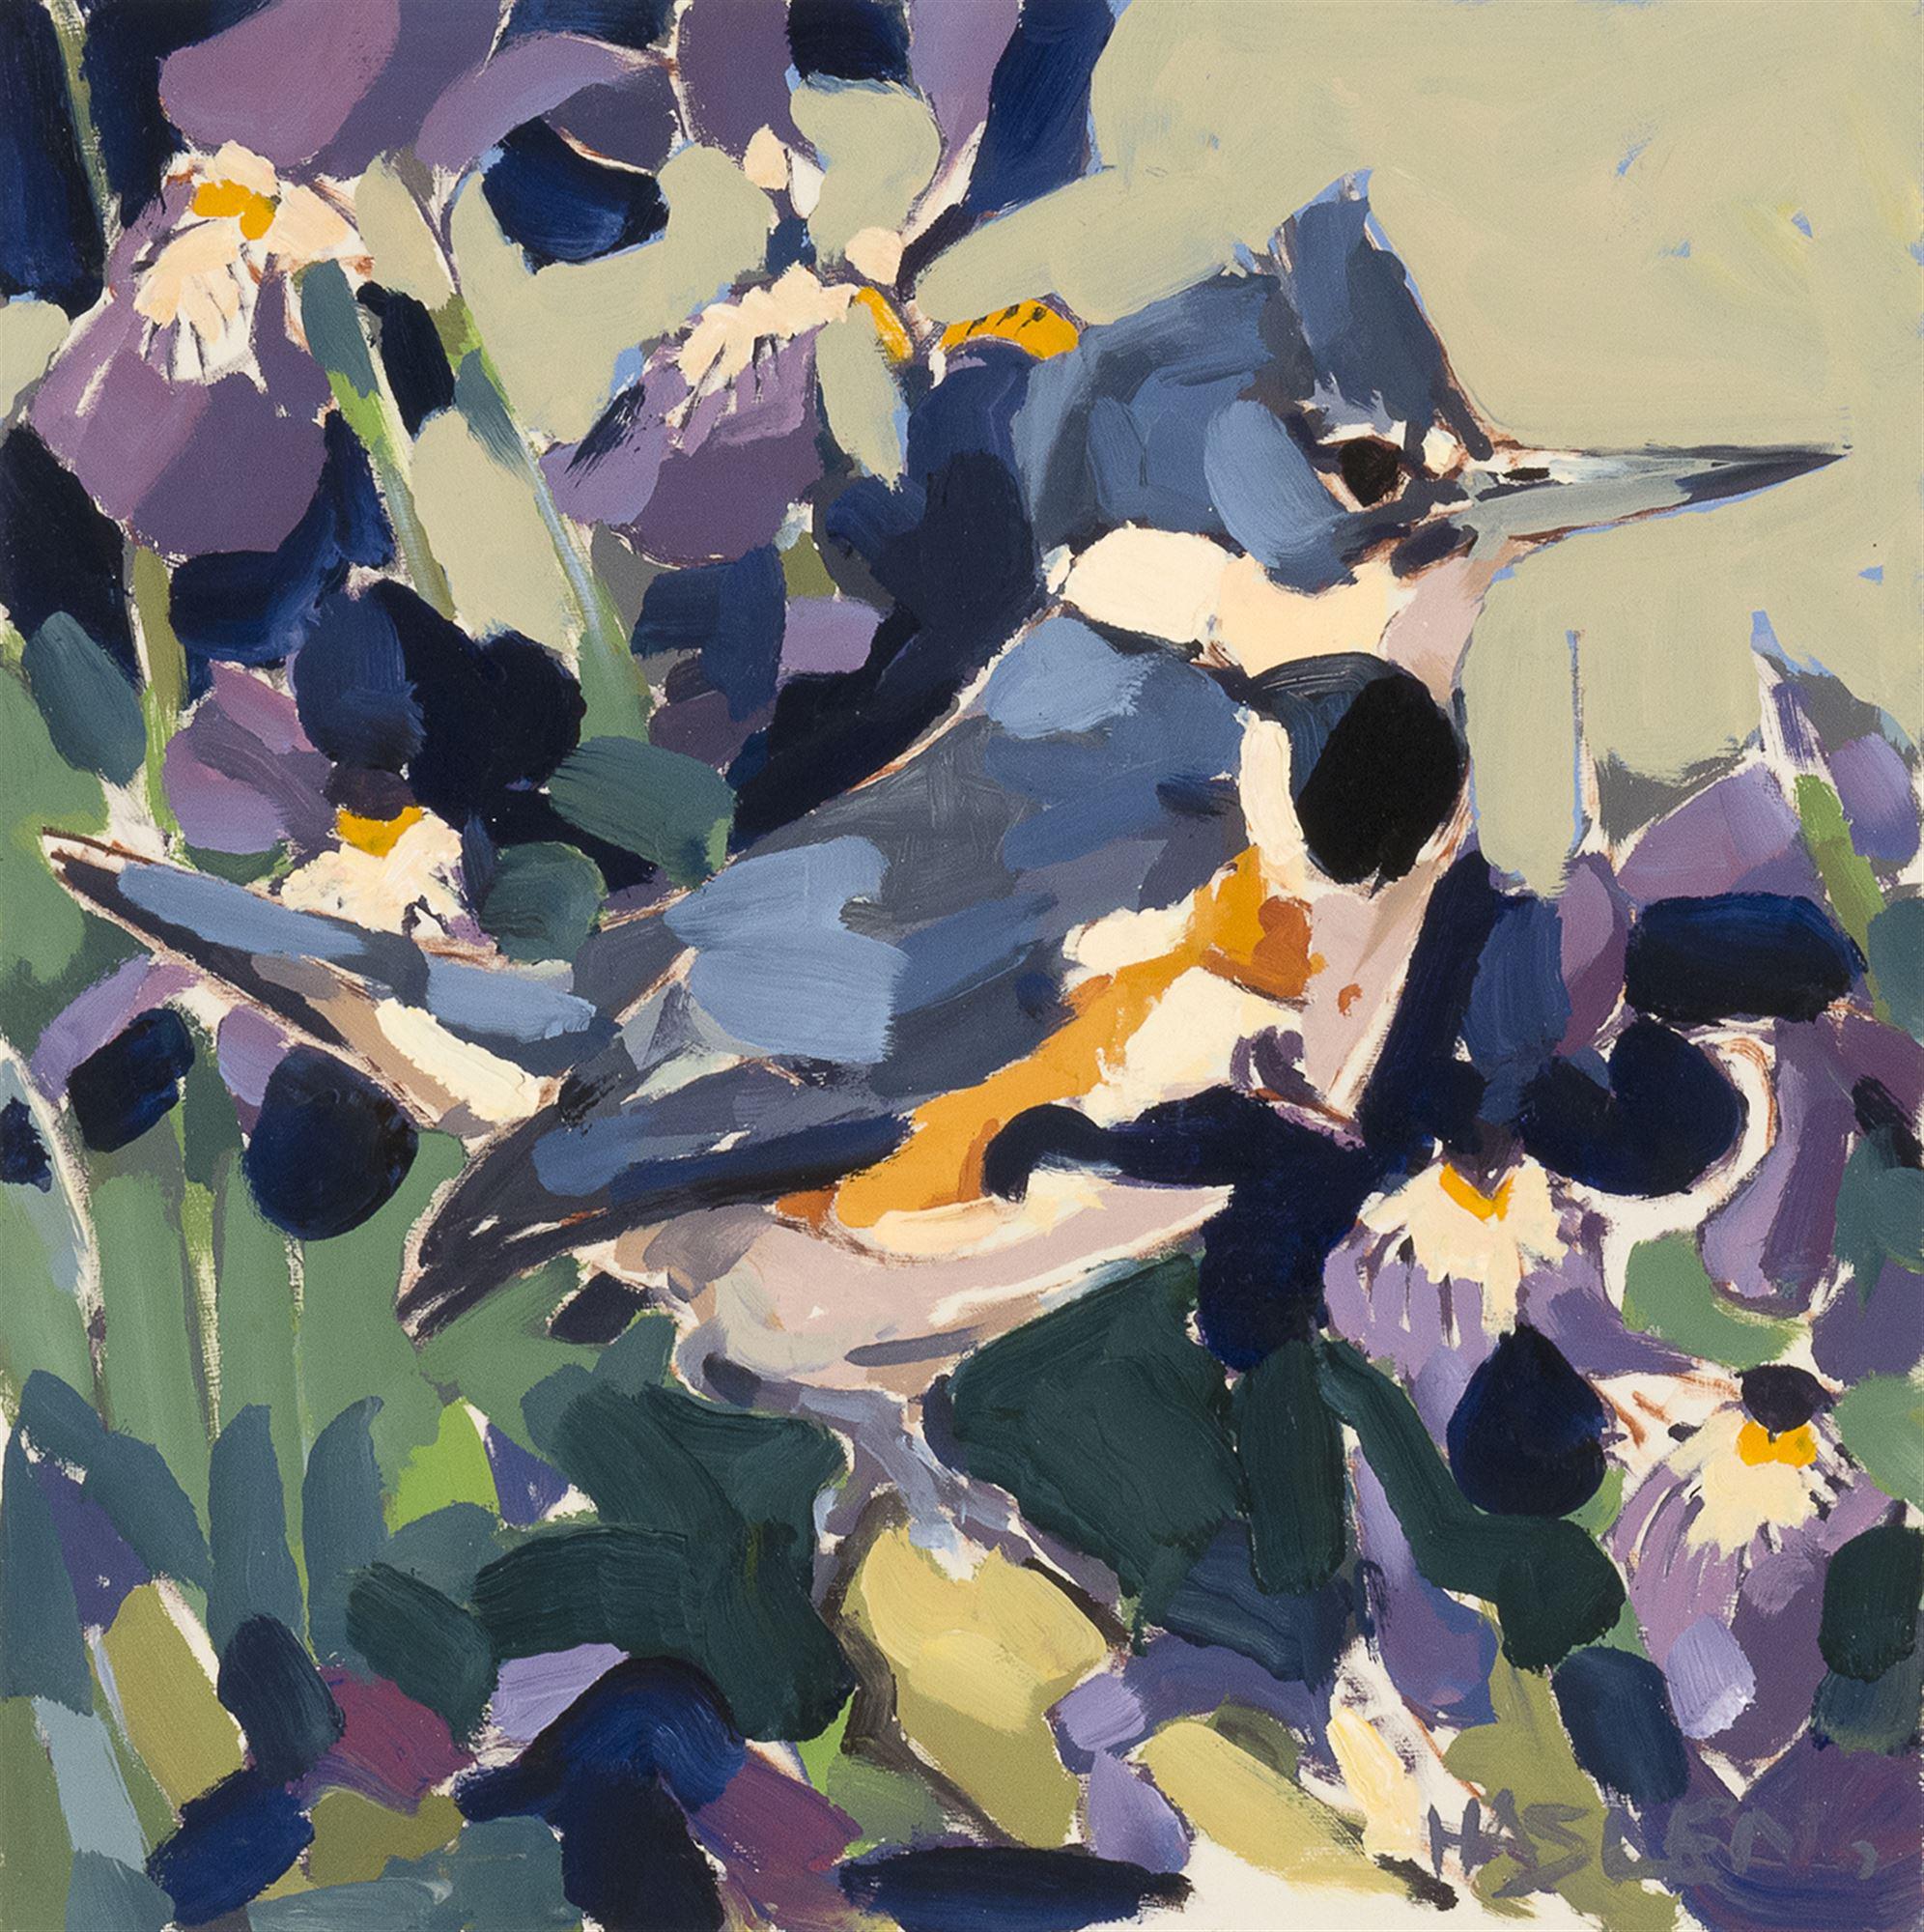 
		                					Andrew Haslen		                																	
																											<i>Kingfisher Patterns,</i>  
																																																					oil on board, 
																																								12 x 11 3/4 inches 
																								
		                				